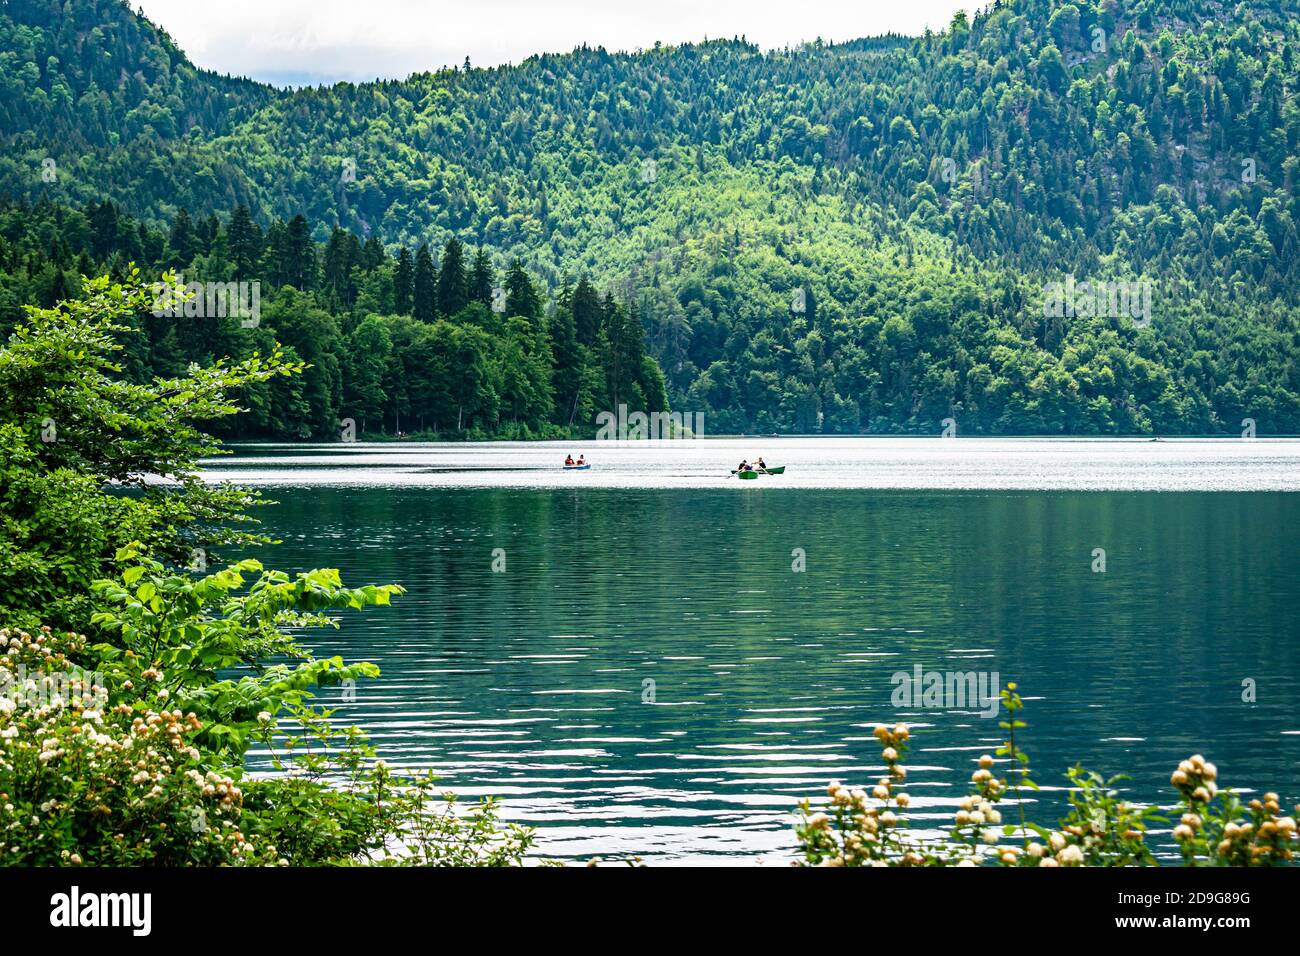 Hohenschwangau Lake, Fussen, Germany, embellishing themountain landscape on a sunny day, bordering the green hills of the forest. Stock Photo